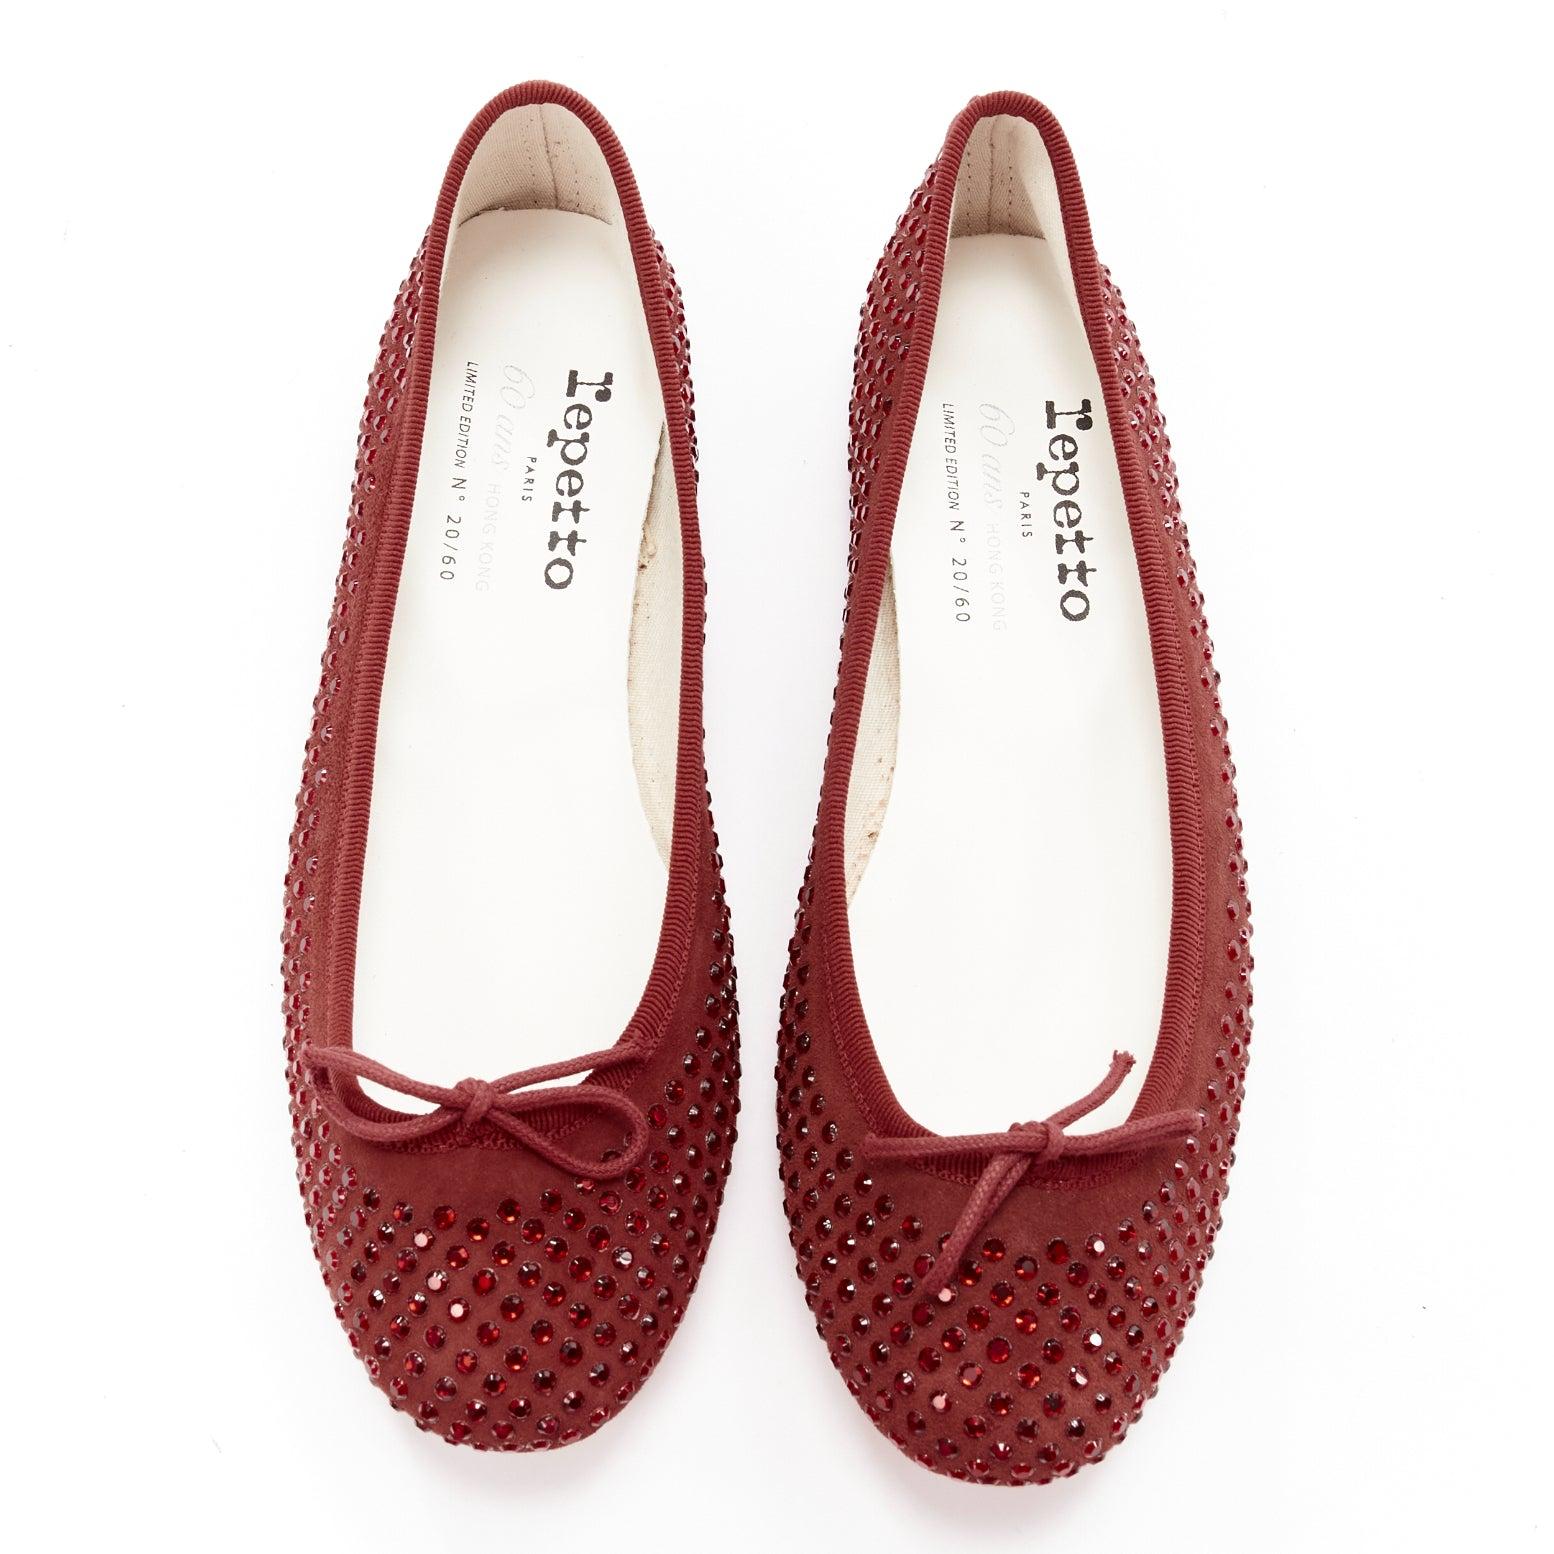 REPETTO 60 Anniversary Limited Edition red crystal suede ballet flats EU37
Reference: ANWU/A01077
Brand: Repetto
Collection: 60 Anniversary Limited Edition
Material: Suede
Color: Red
Pattern: Solid
Closure: Slip On
Lining: White Leather
Made in: